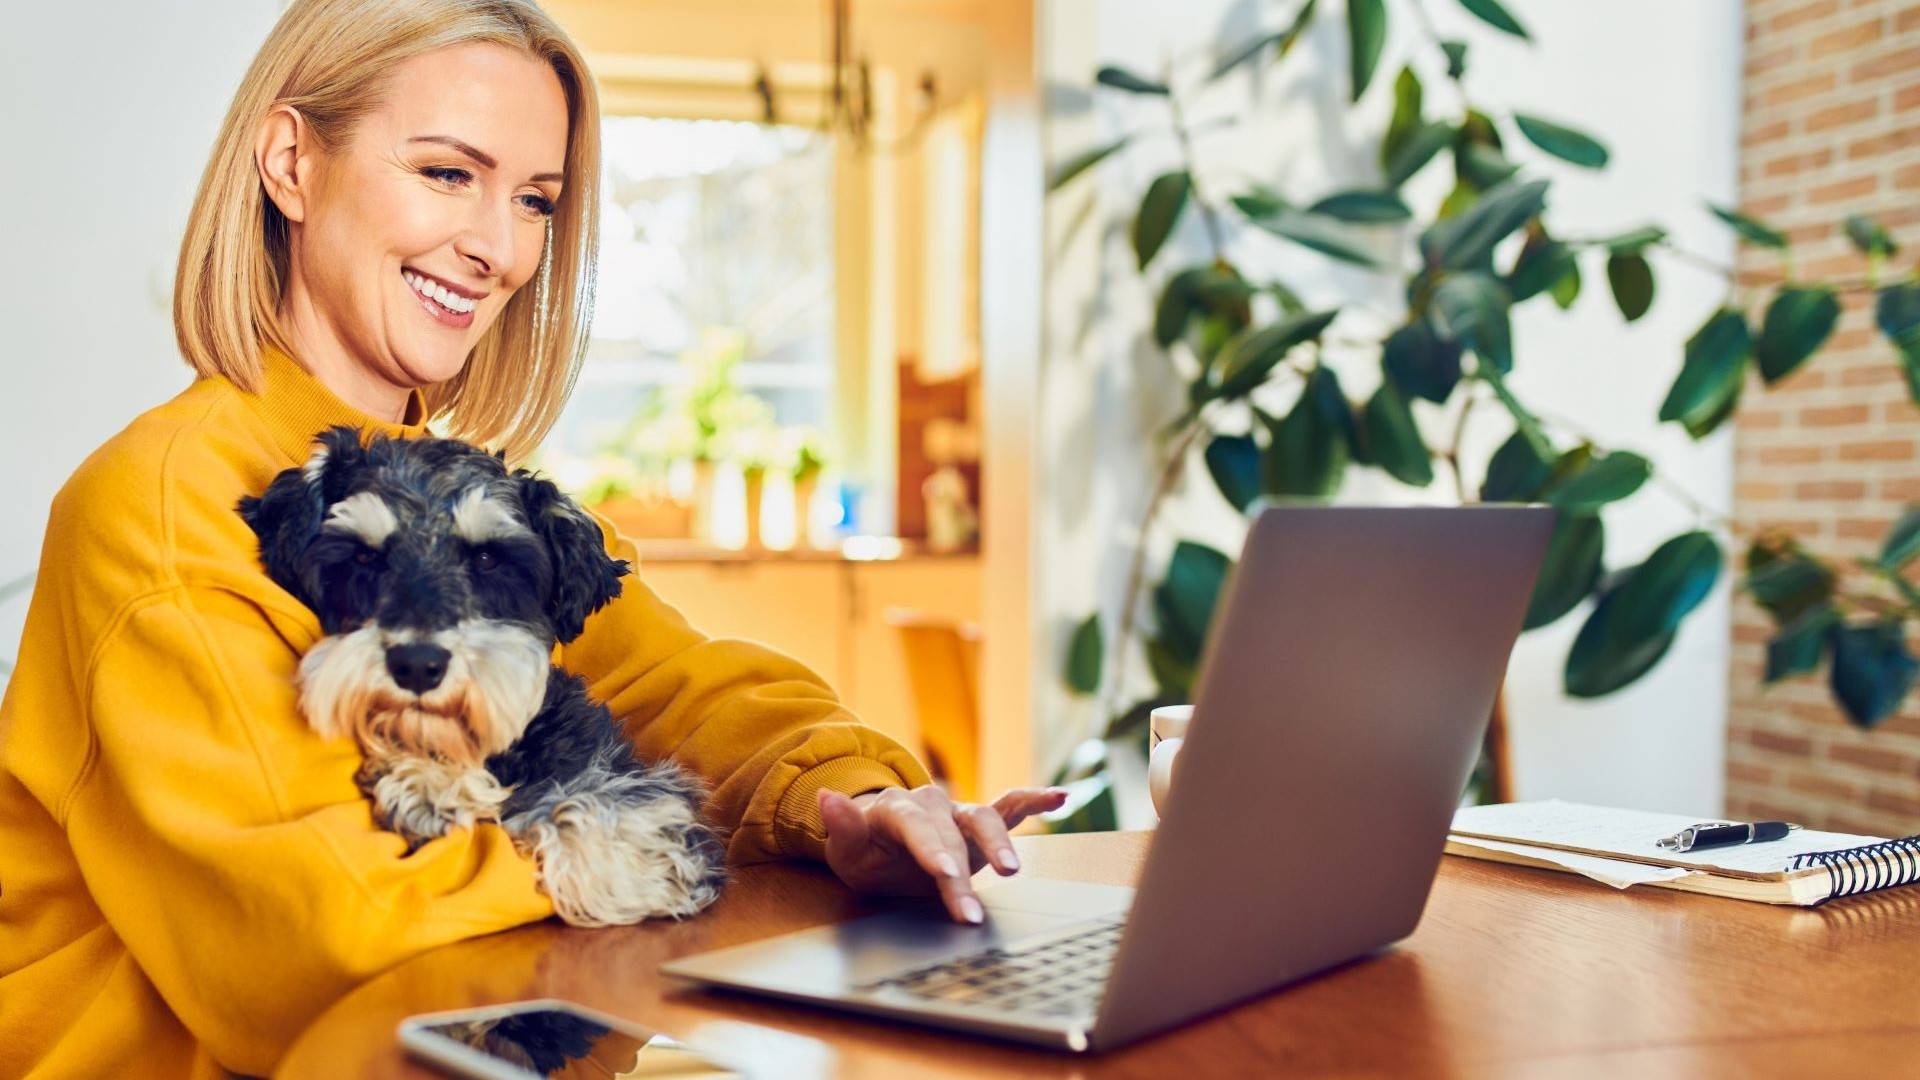 A smiling lady holding a dog works on a laptop computer.